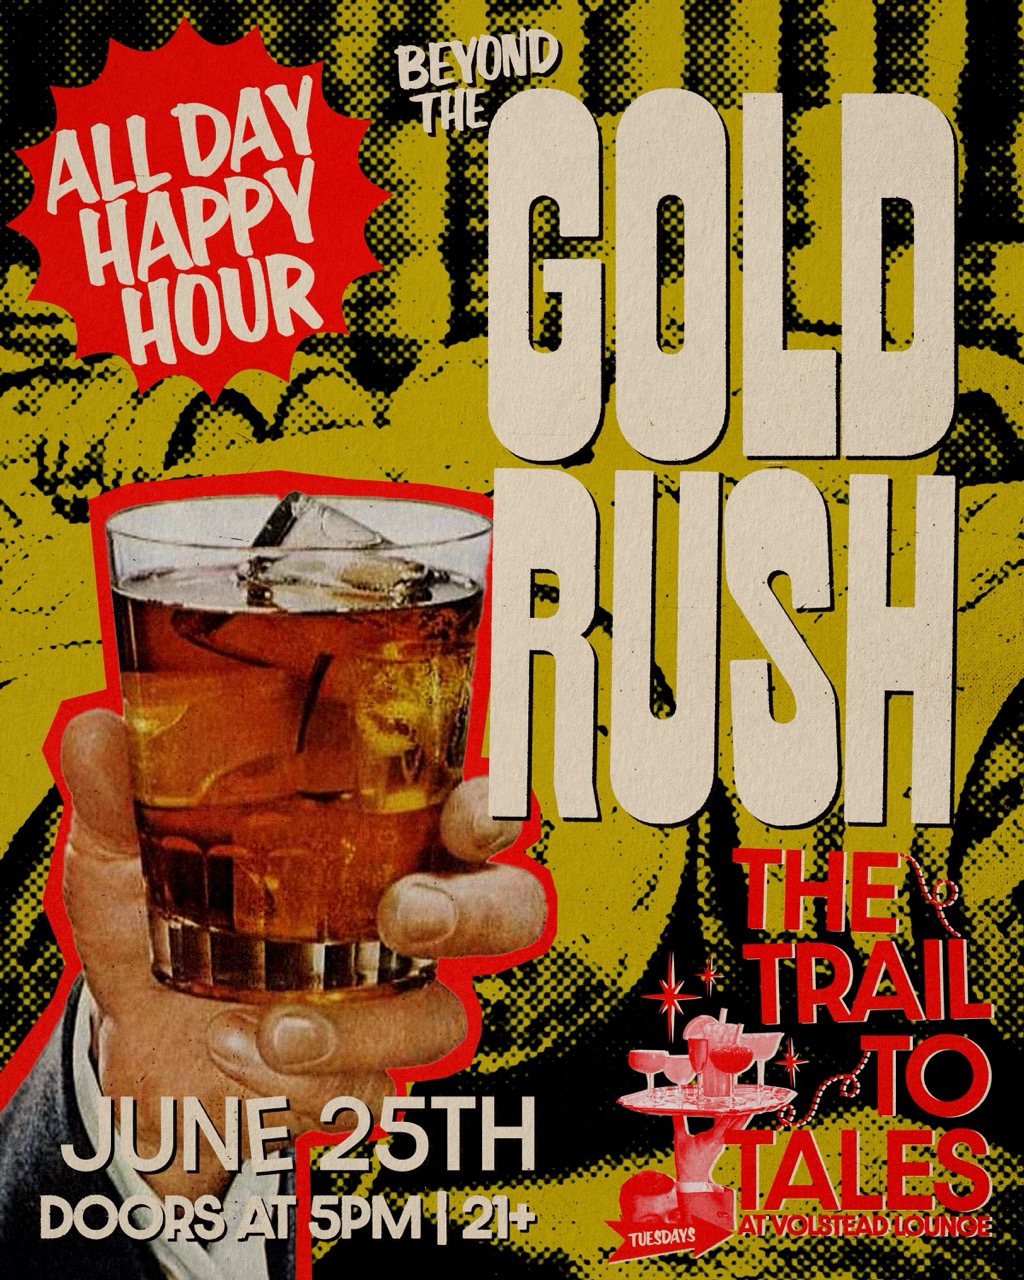 The Trail to Tales: Beyond the Gold Rush @ Volstead Lounge